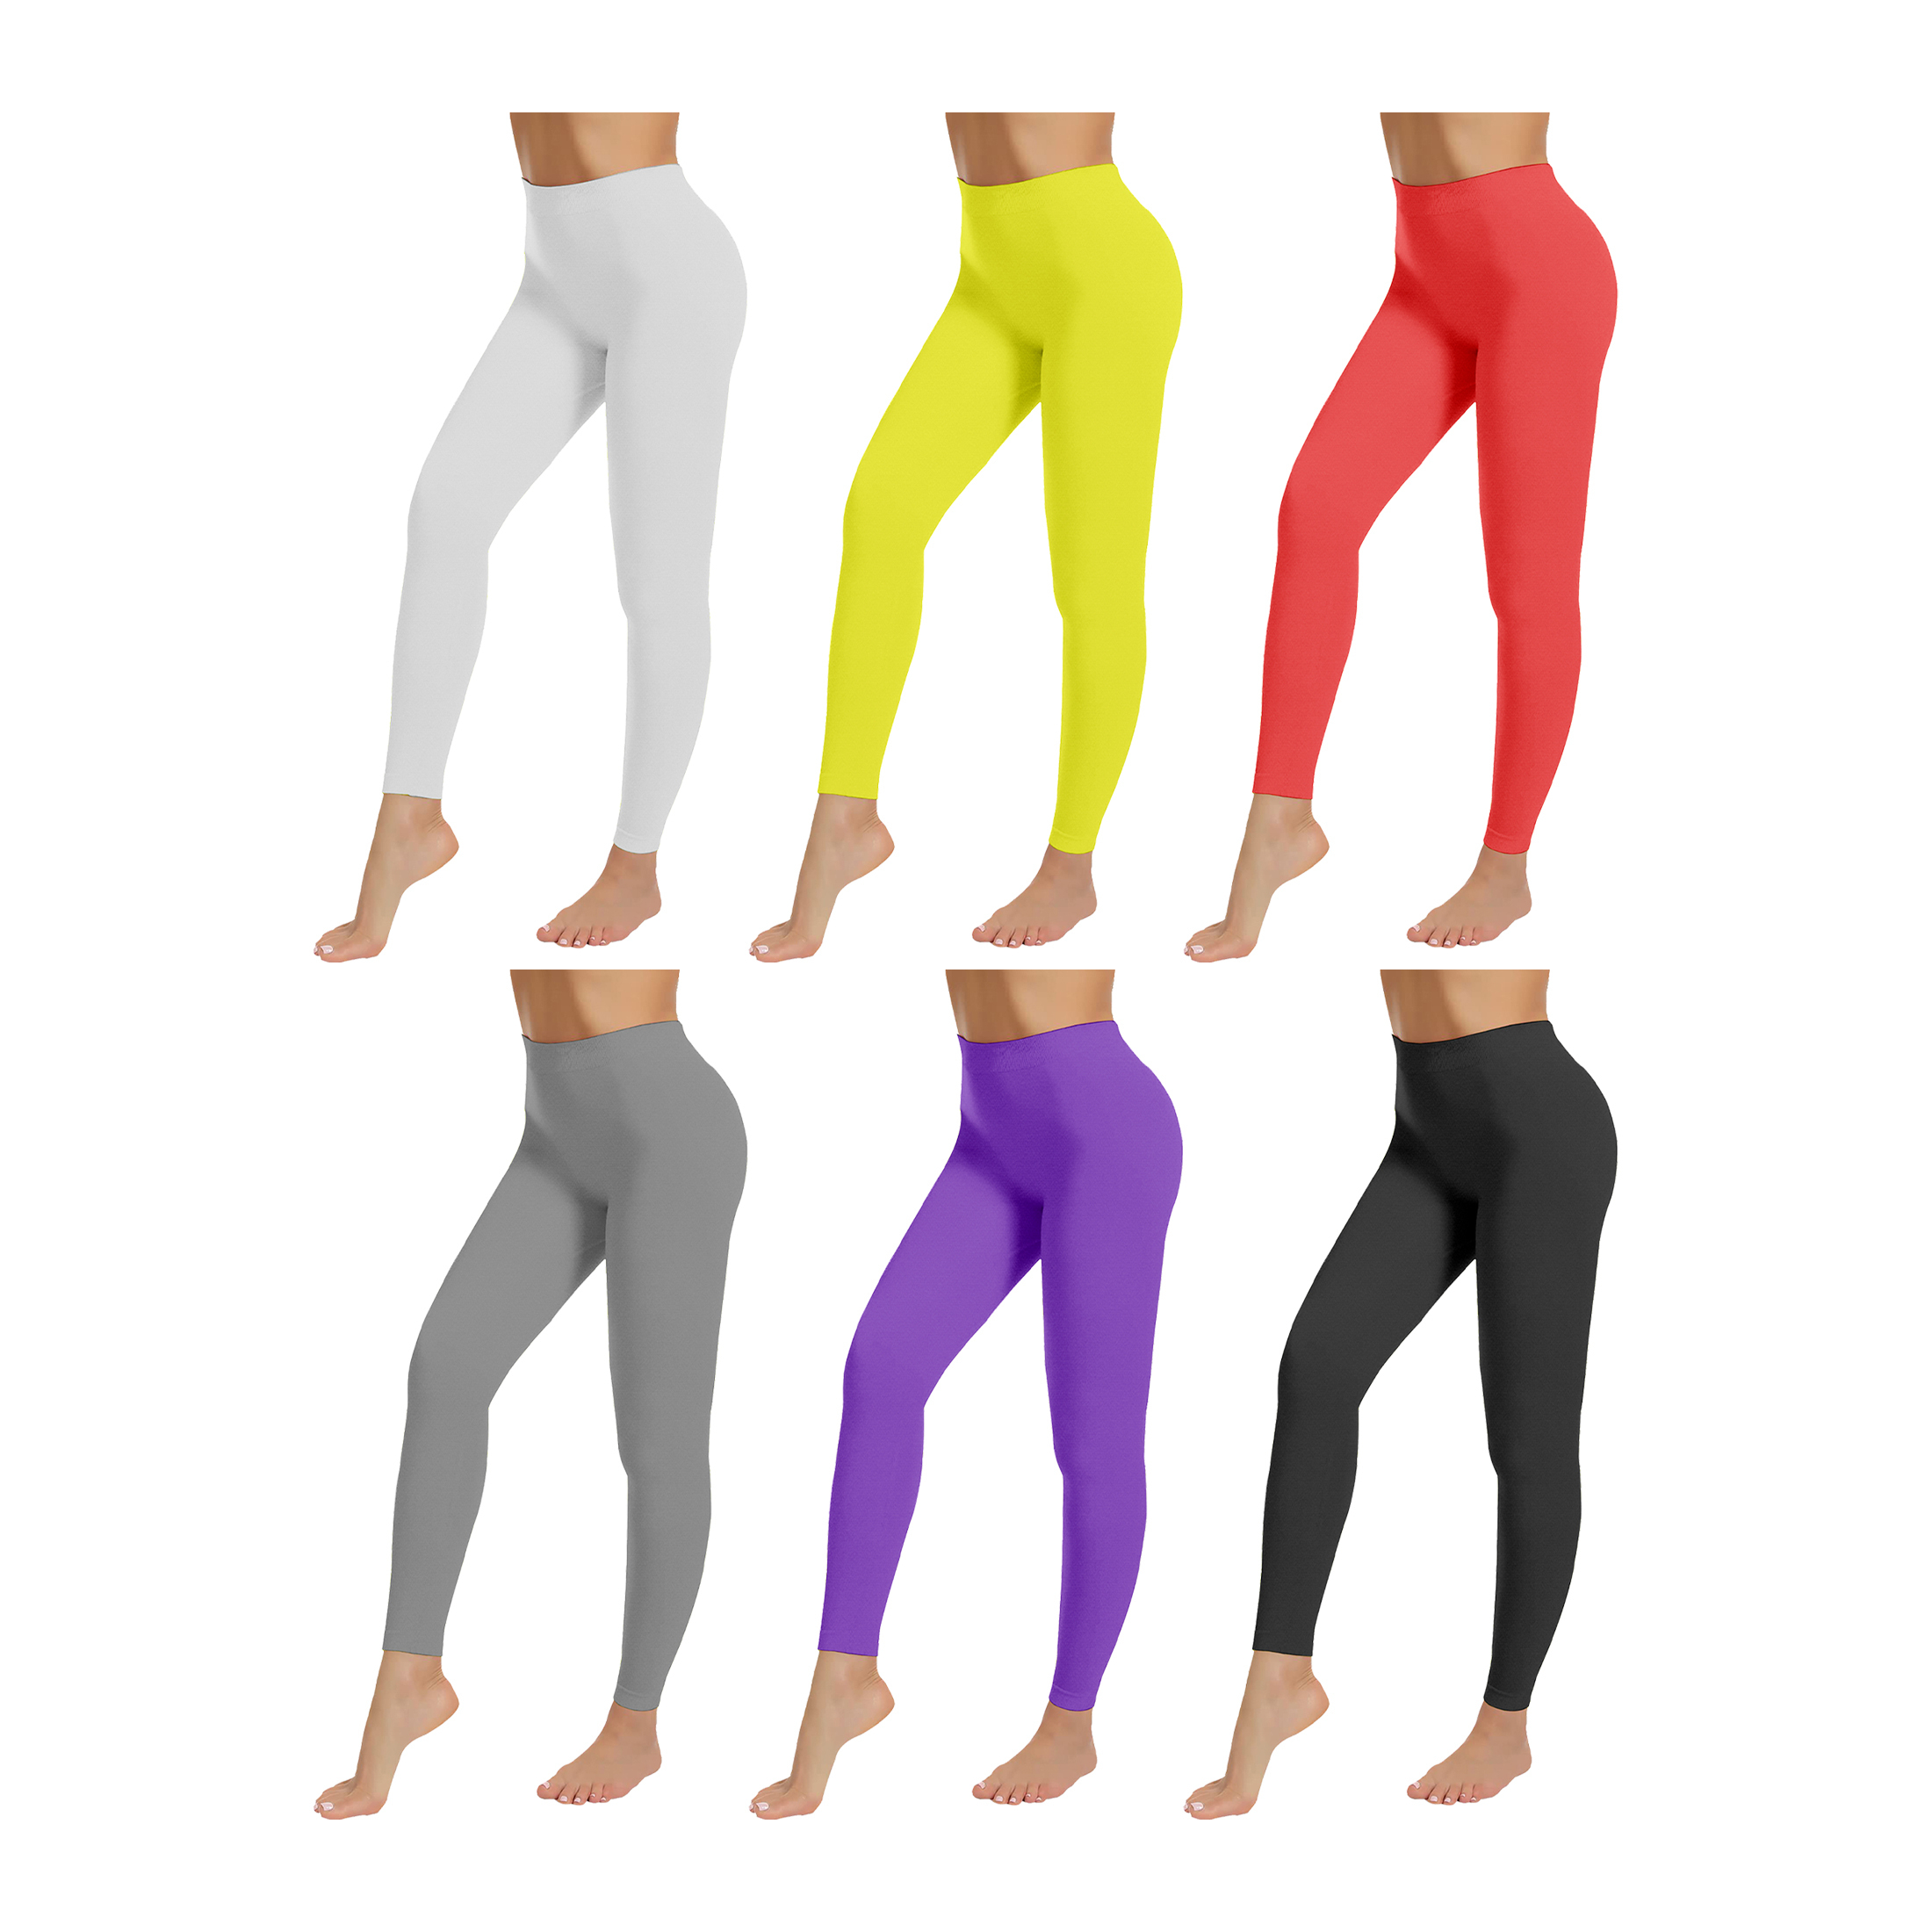 3-Pack: Women's High-Waist Ultra-Soft Solid Fitness Stretchy Yoga Leggings Pants - S